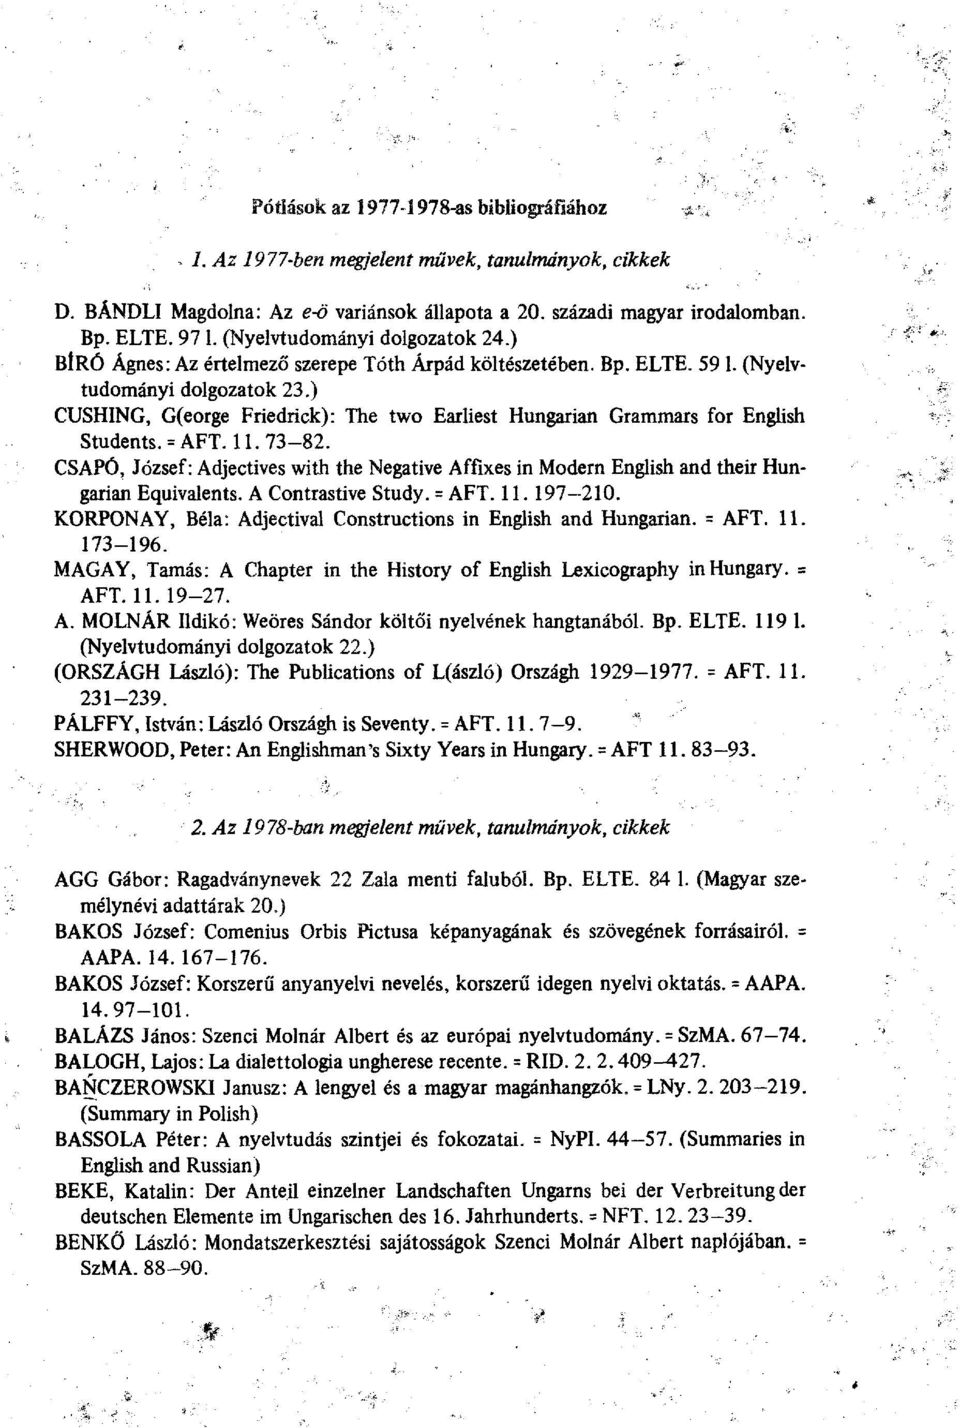 ) CUSHING, G(eorge Friedrick): The two Earliest Hungarian Grammars for English Students. = AFT. 11.73-82.